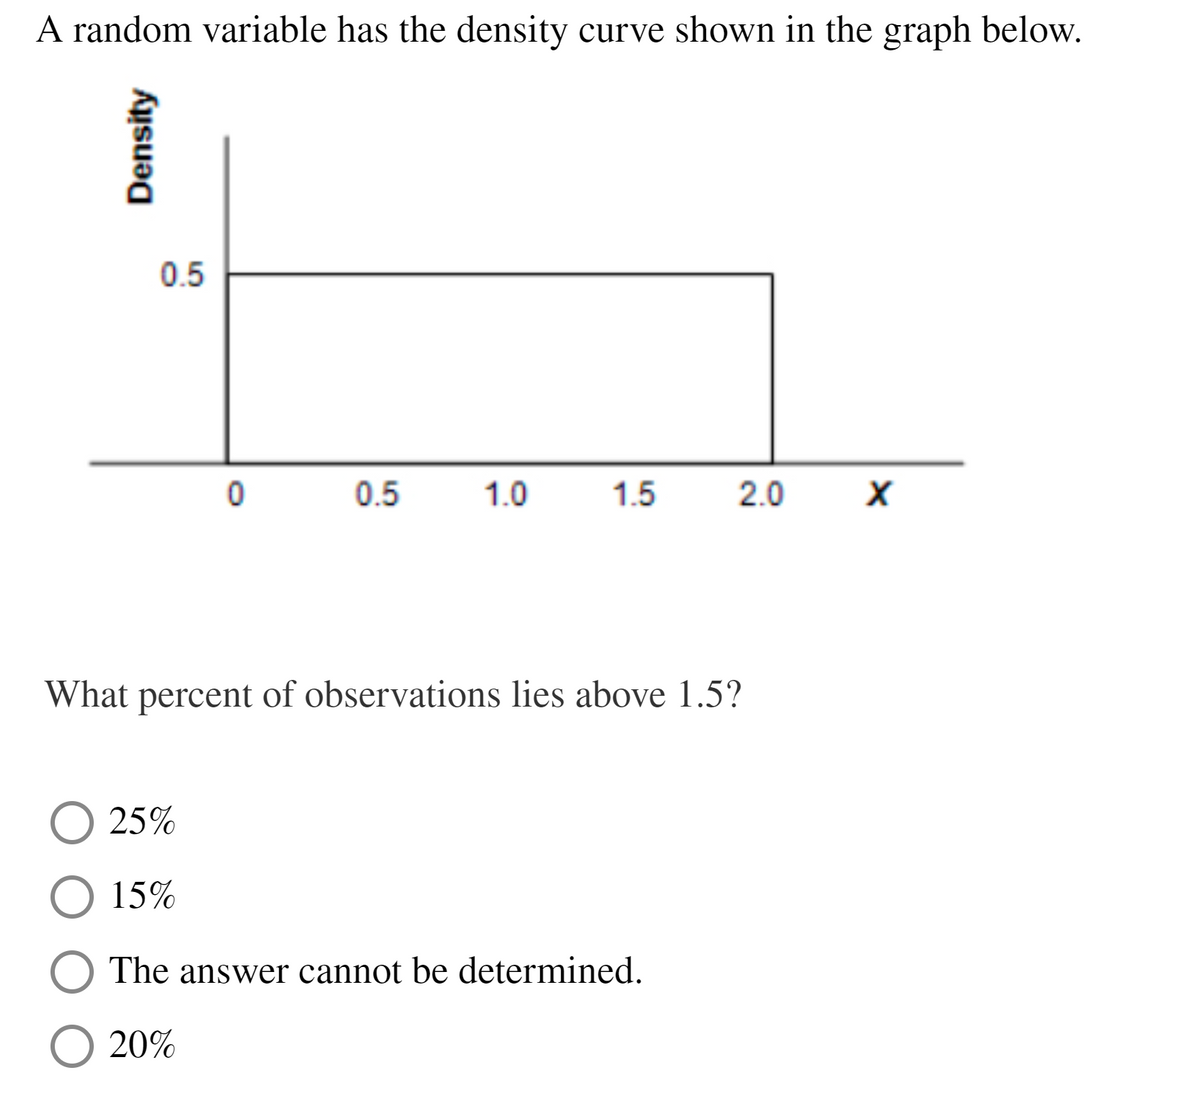 A random variable has the density curve shown in the graph below.
0.5
0.5
1.0
1.5
2.0
What percent of observations lies above 1.5?
O 25%
15%
The answer cannot be determined.
20%
Density
